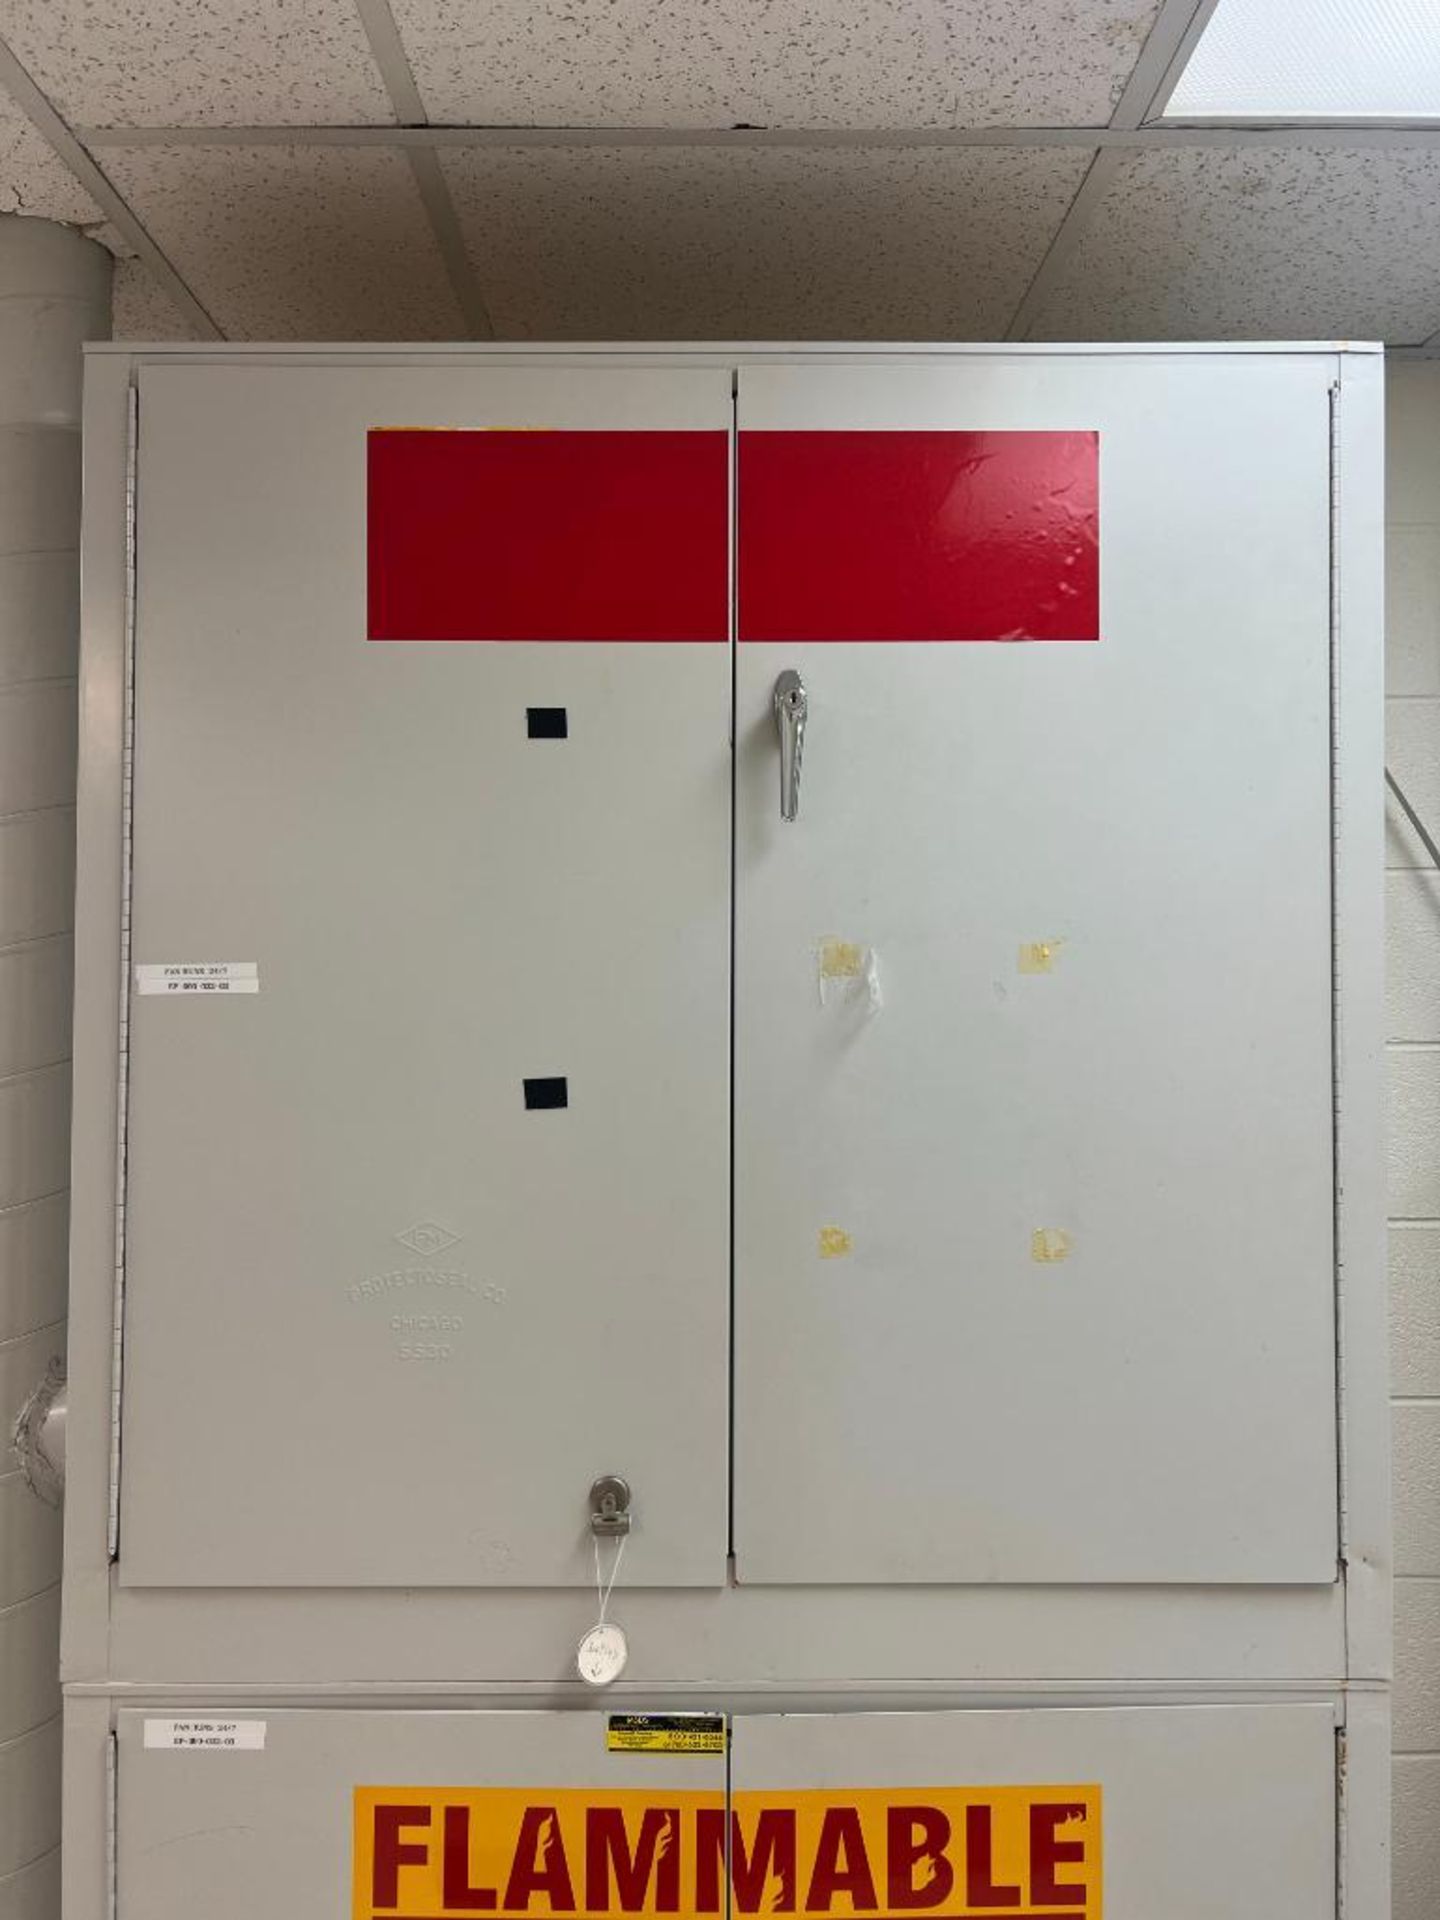 Flammable Material Cabinets - Rigging Fee: $300 - Image 2 of 3